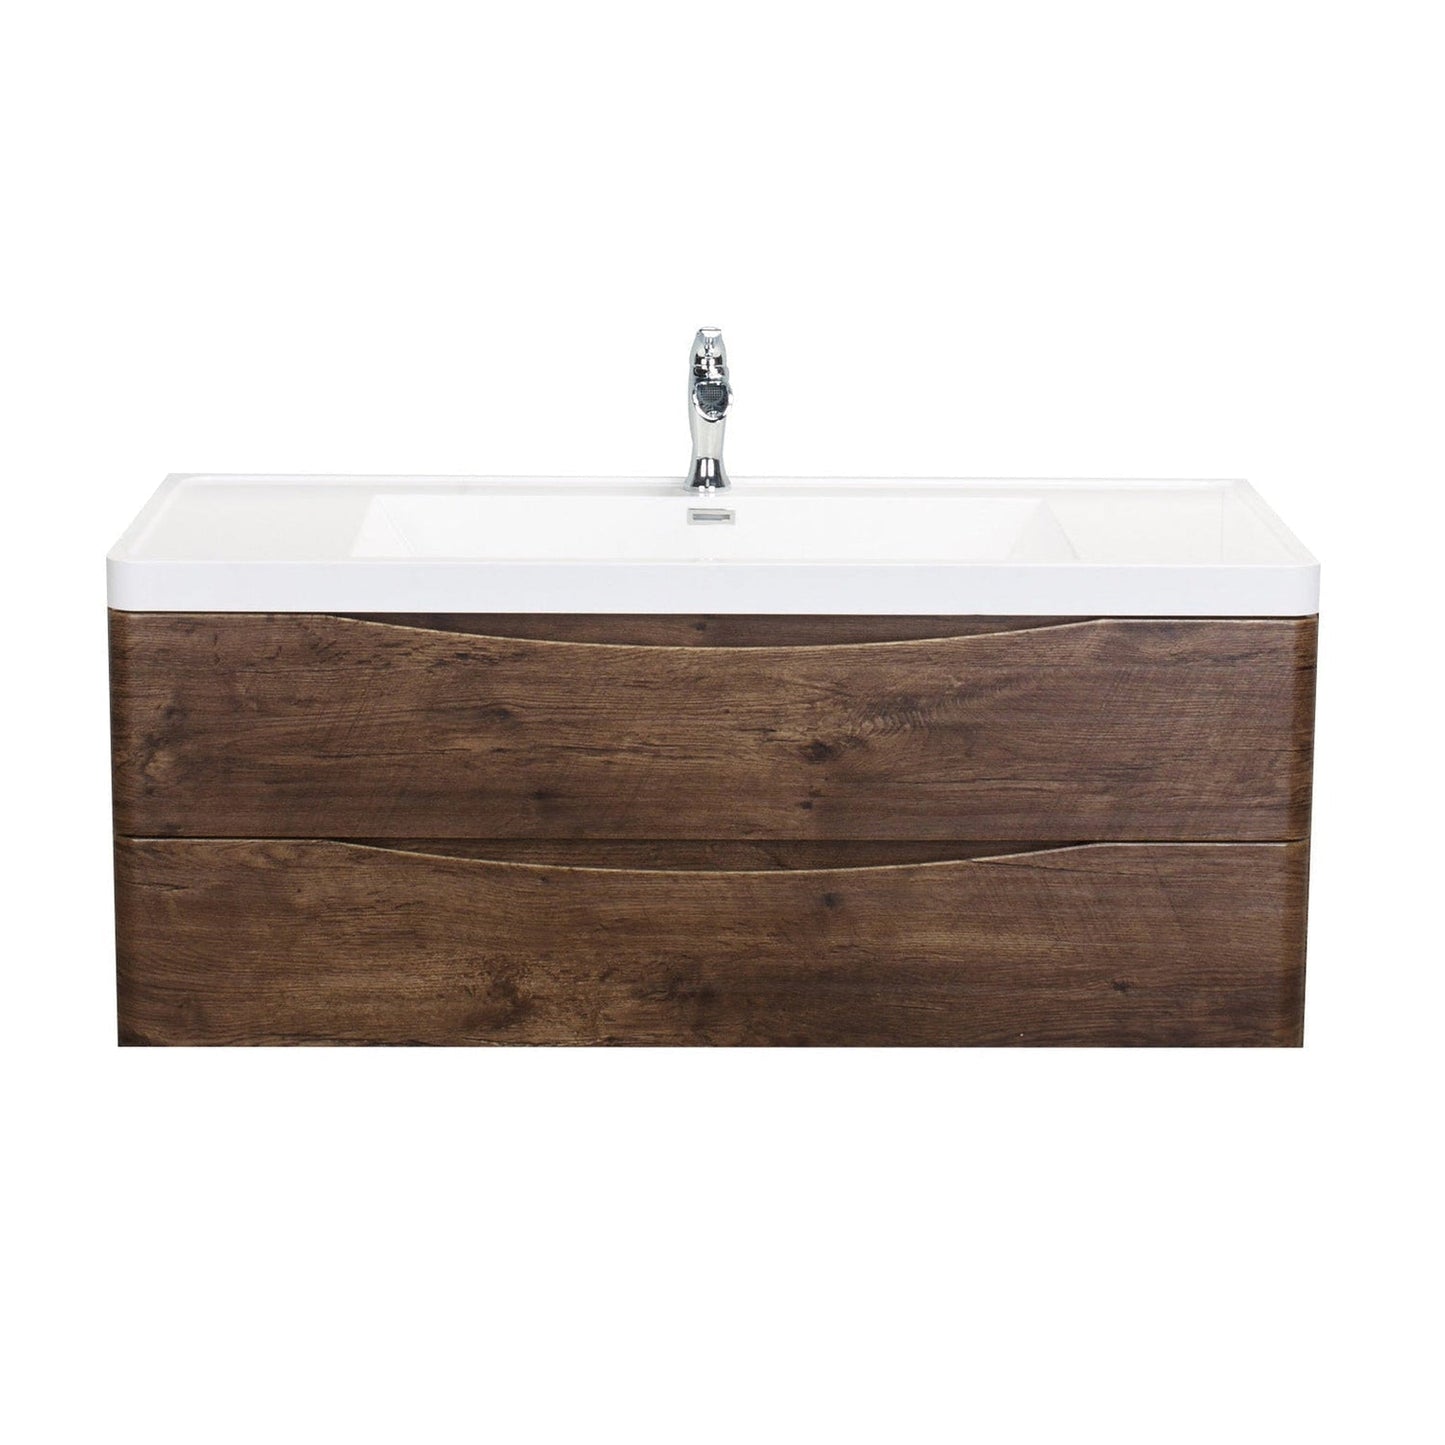 Eviva Smile 48" x 29" Rosewood Wall-Mounted Bathroom Vanity With White Single Integrated Sink